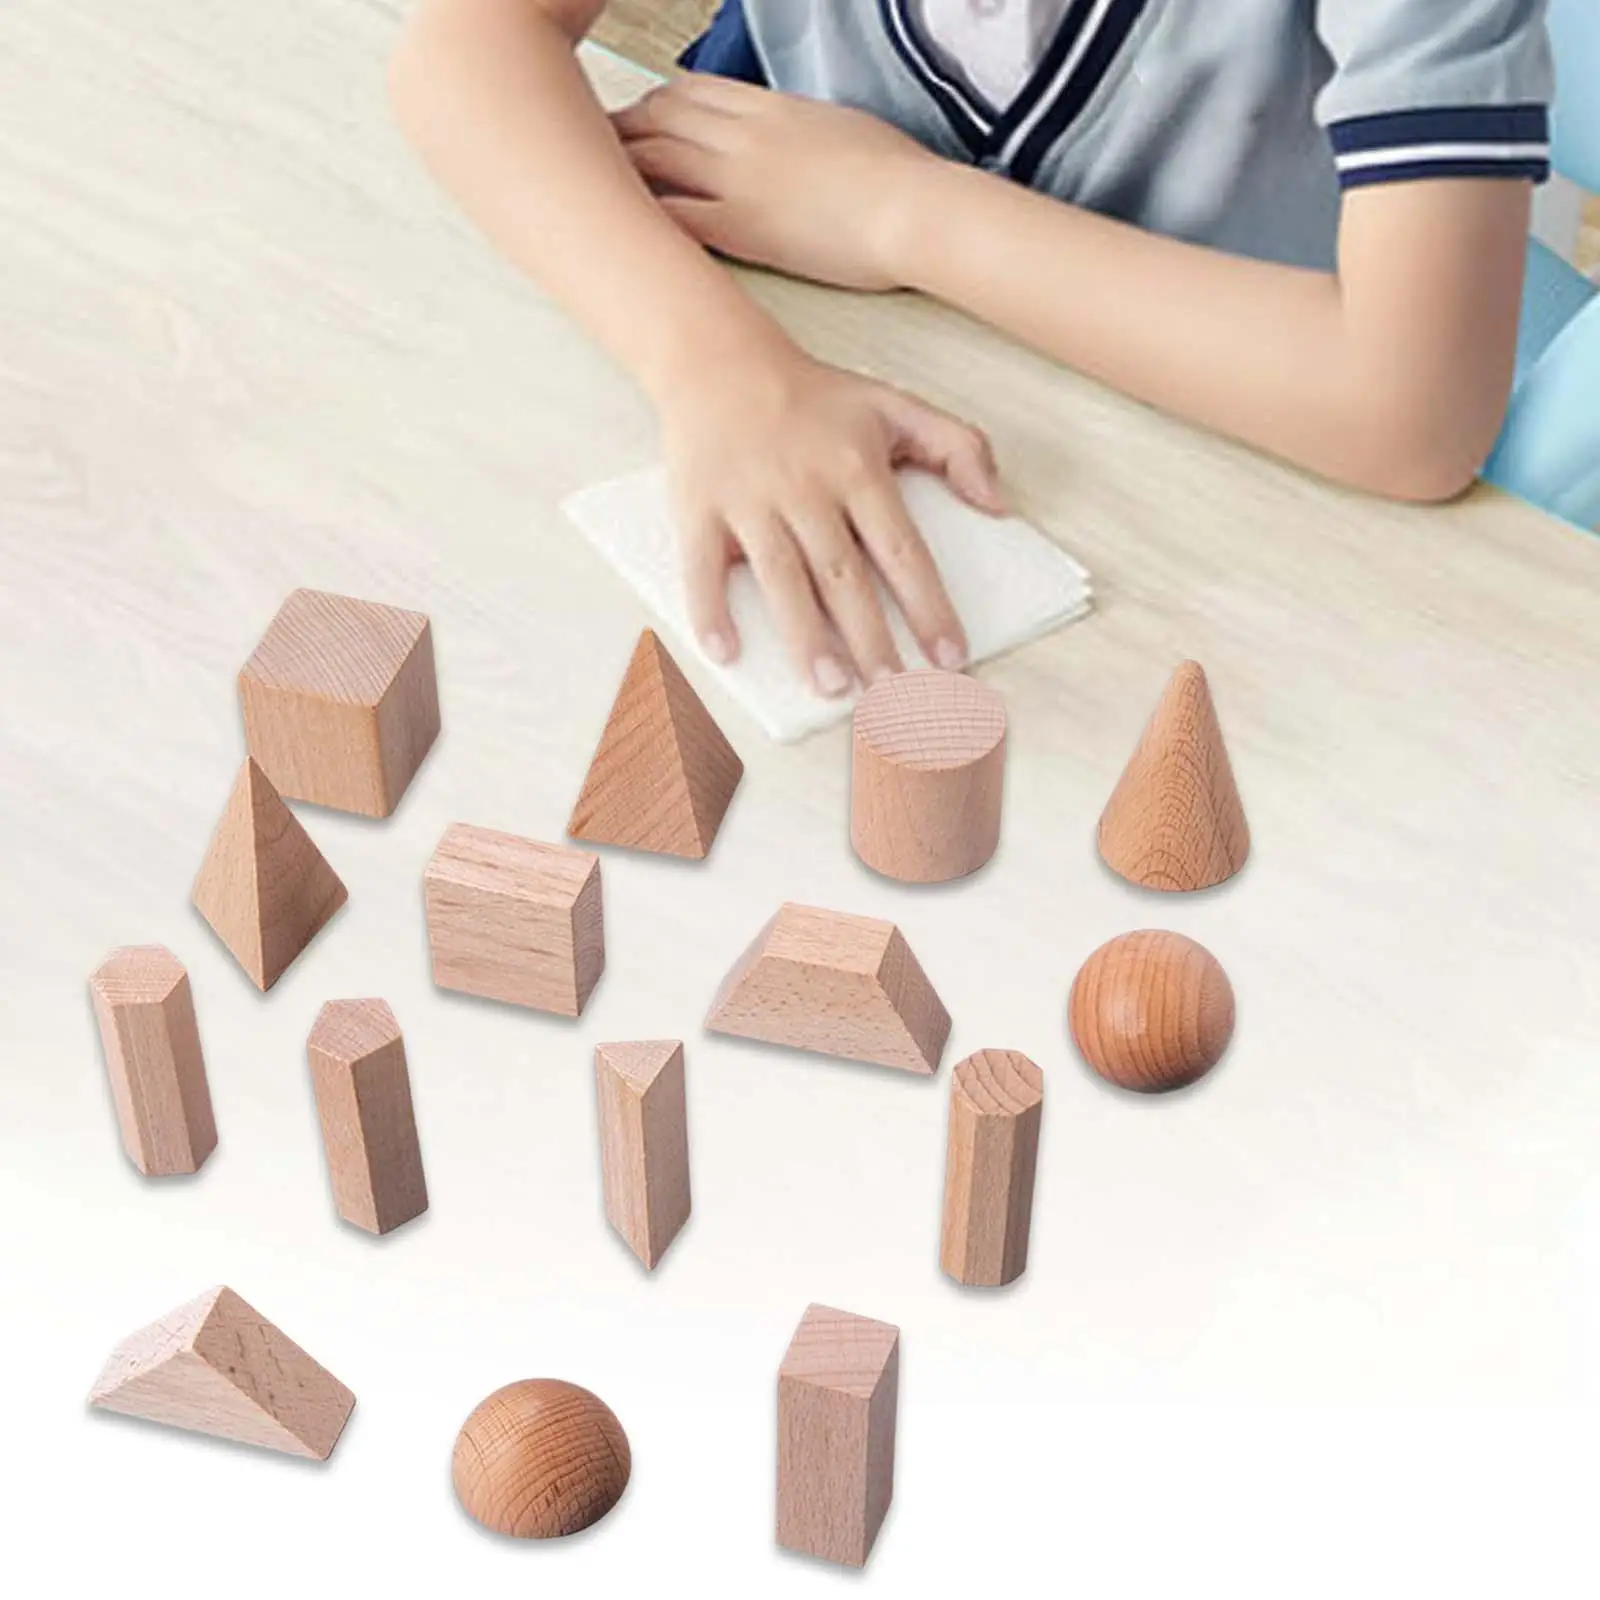 15 Pieces Wood Geometric Solids Educational Toy 3D Shapes Montessori Toys Stacking Toy for Babies Toddler Ages 2+ Kids